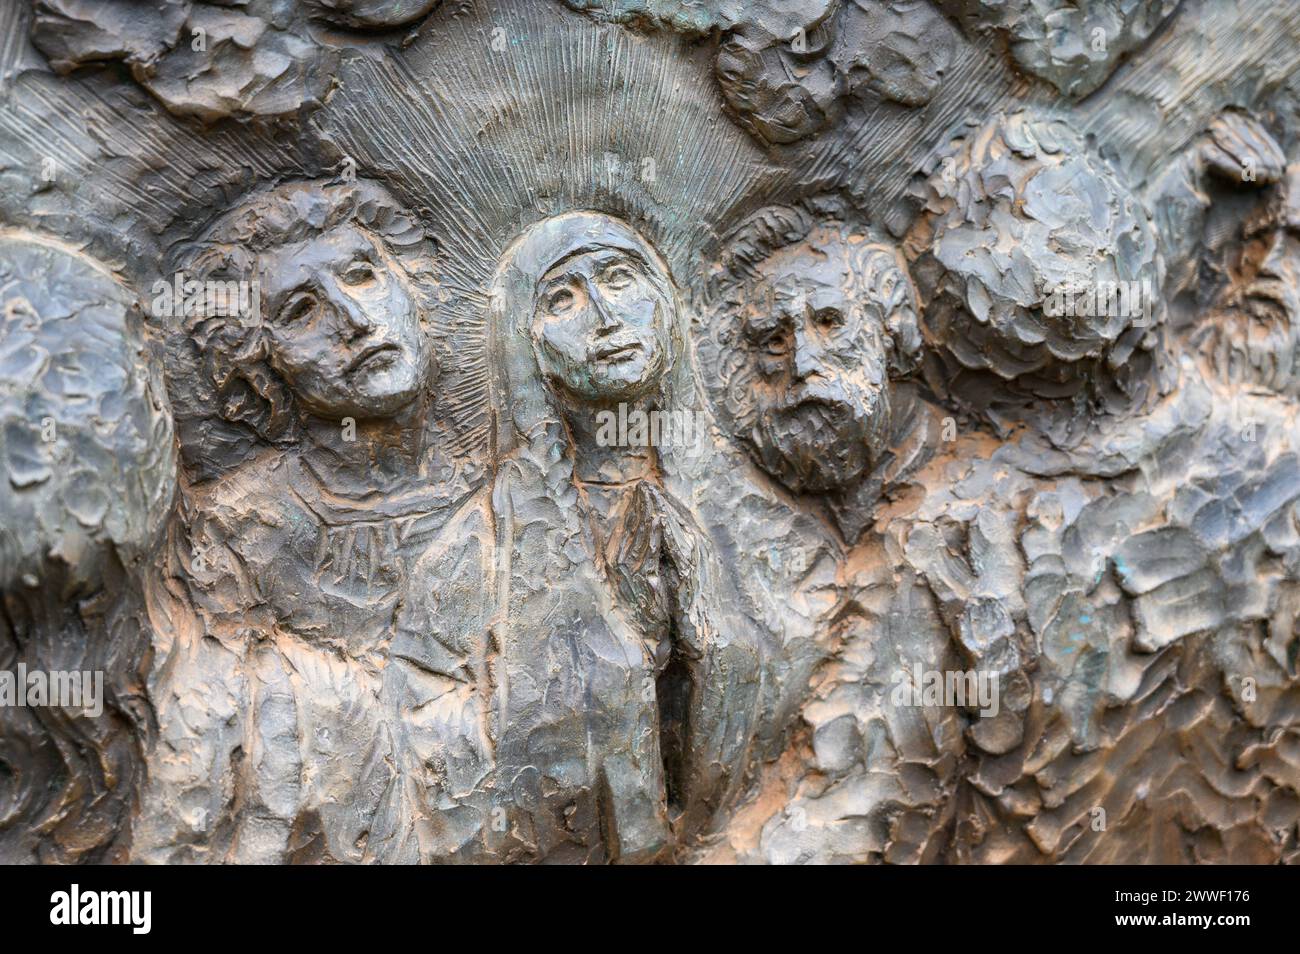 The Ascension of Jesus – Second Glorious Mystery of the Rosary. A relief sculpture on Mount Podbrdo (the Hill of Apparitions) in Medjugorje. Stock Photo